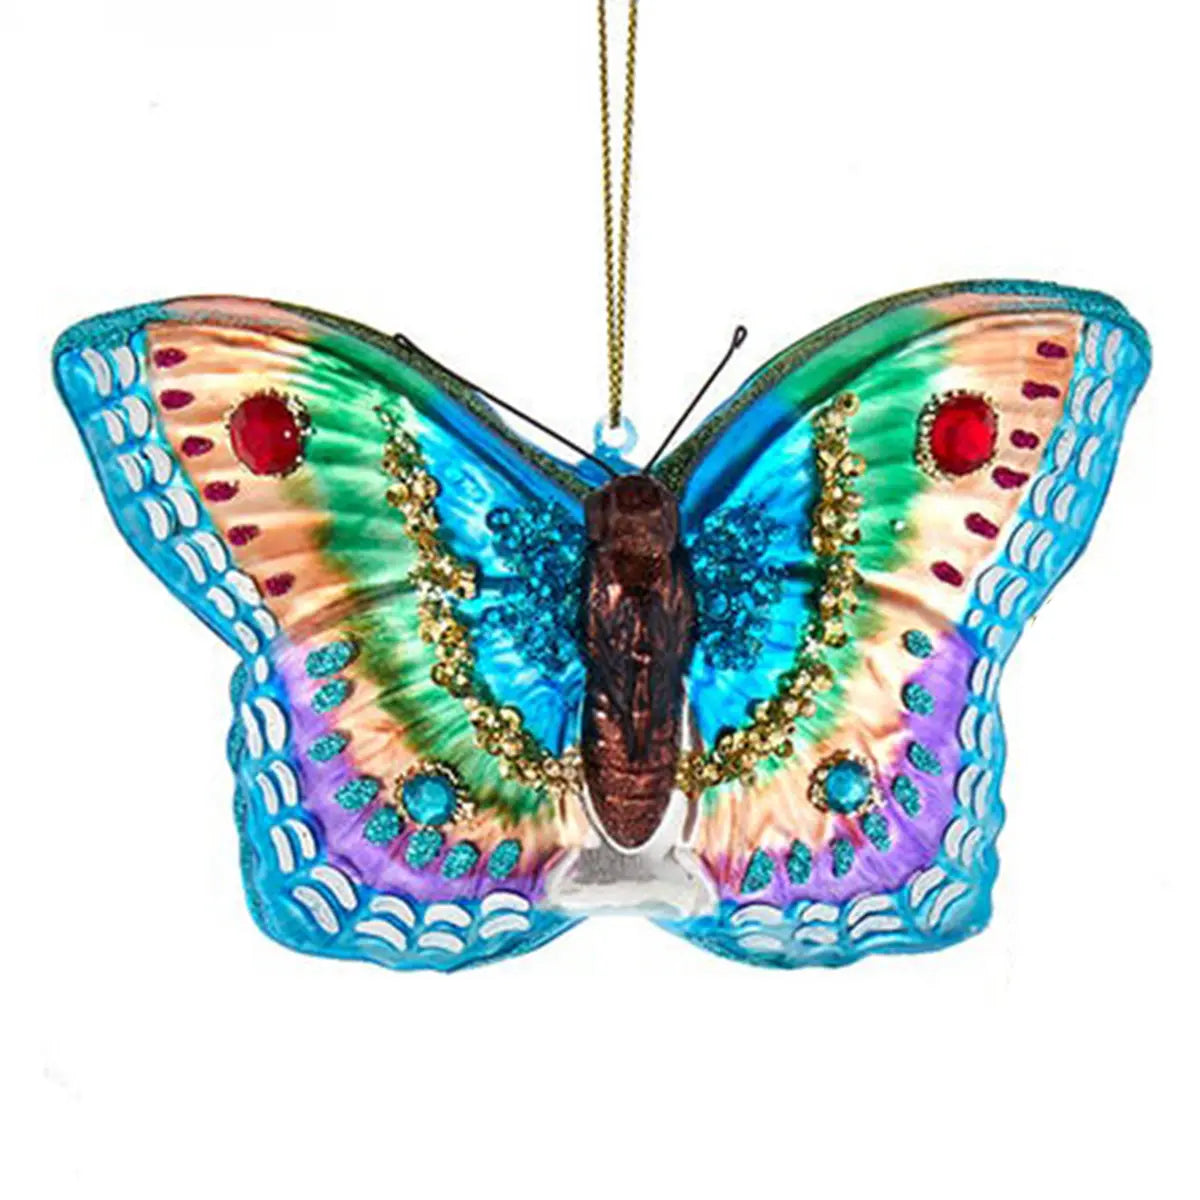 Kurt Adler 3.25in Glass Butterfly with Bronze Accents Ornament